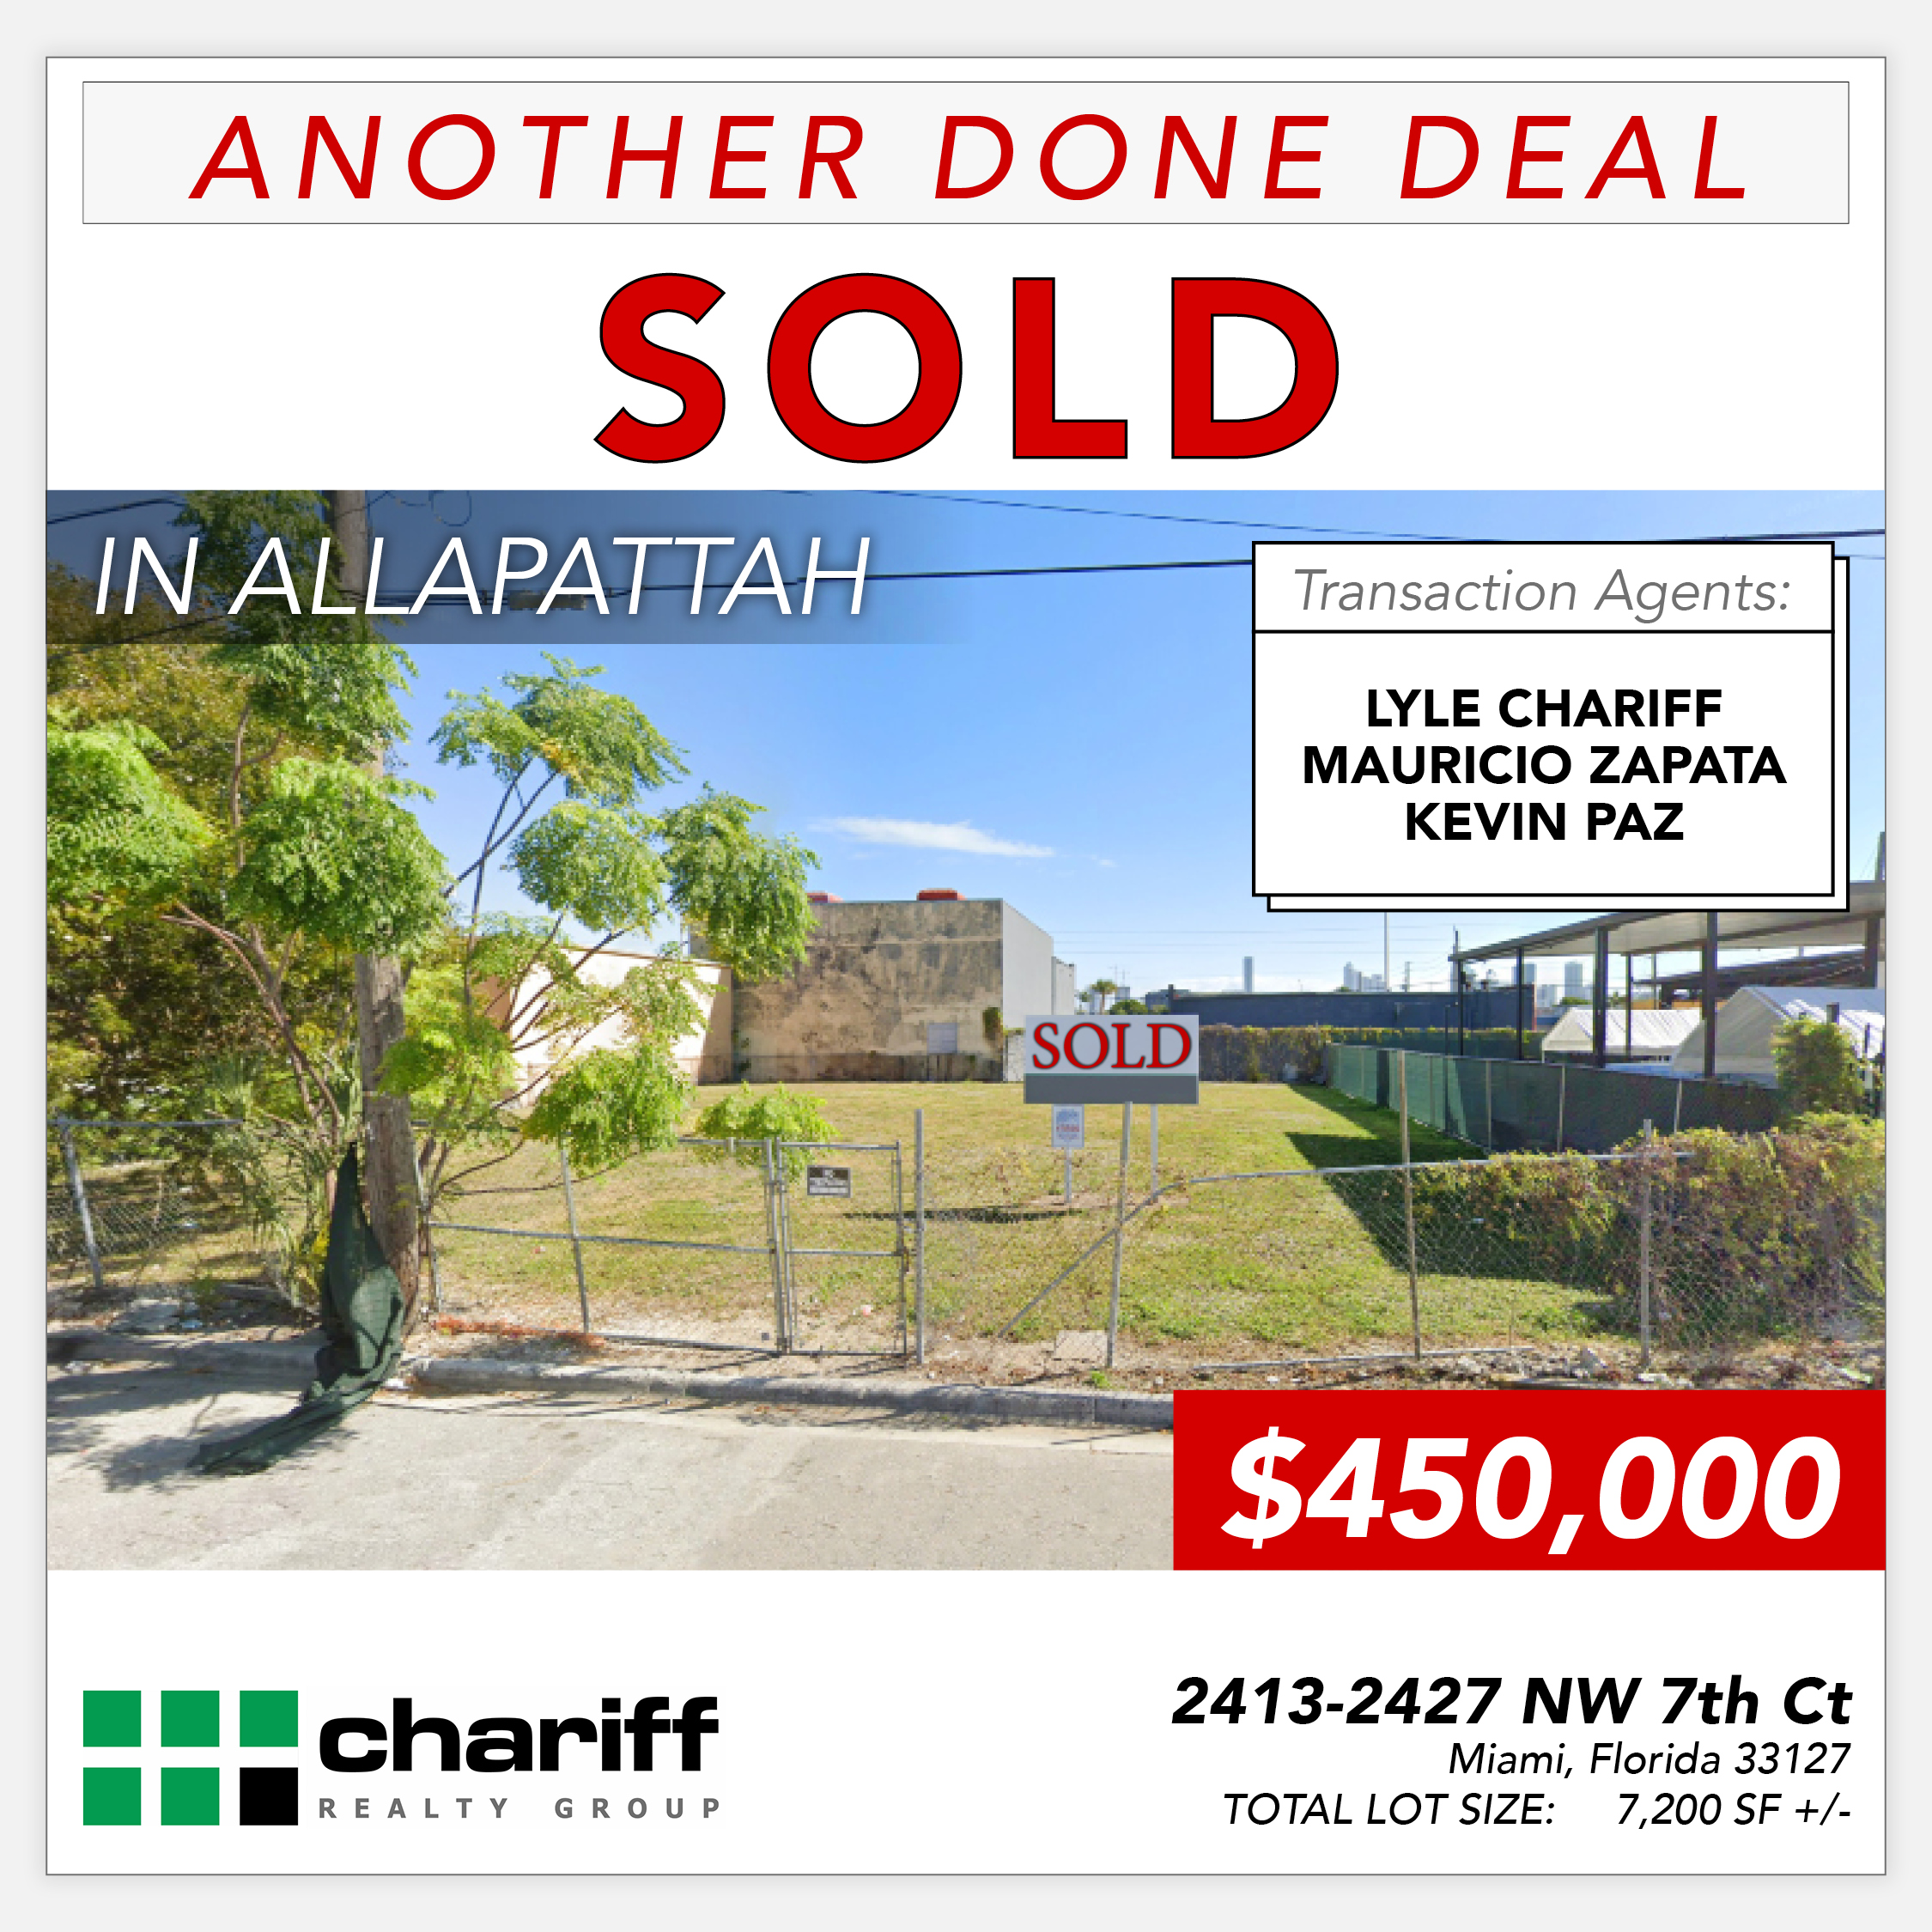 2413 NW 7th Ct- Another Done Deal-Sold-Allapattah-Miami -Florida-33142-Chariff Realty Group